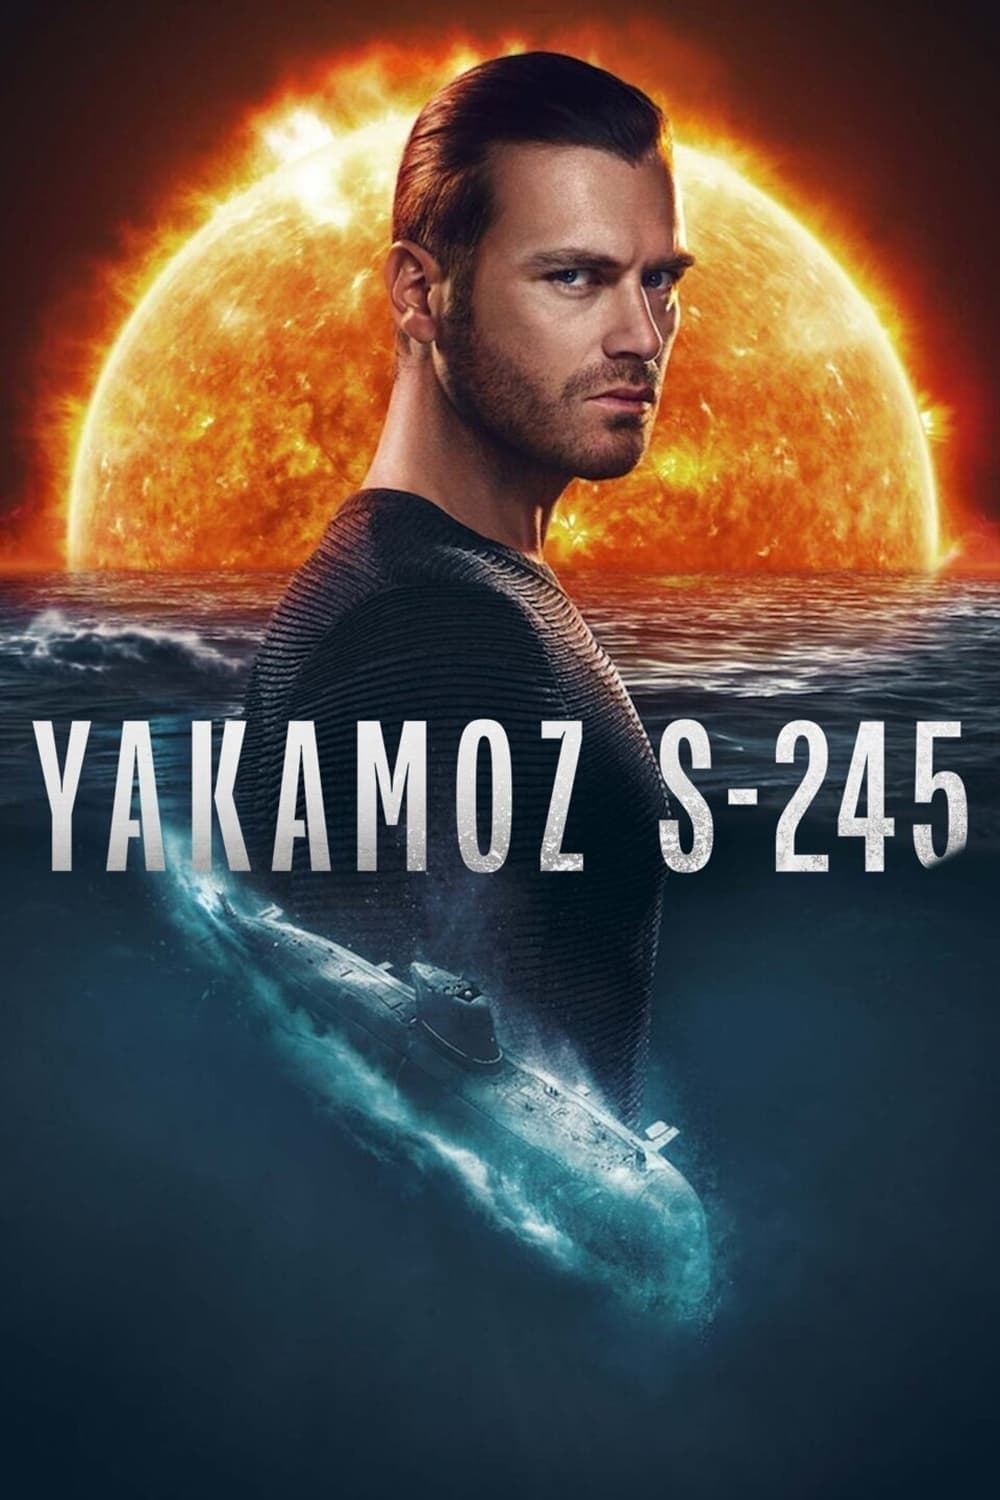 Yakamoz S-245 TV Shows About Survival